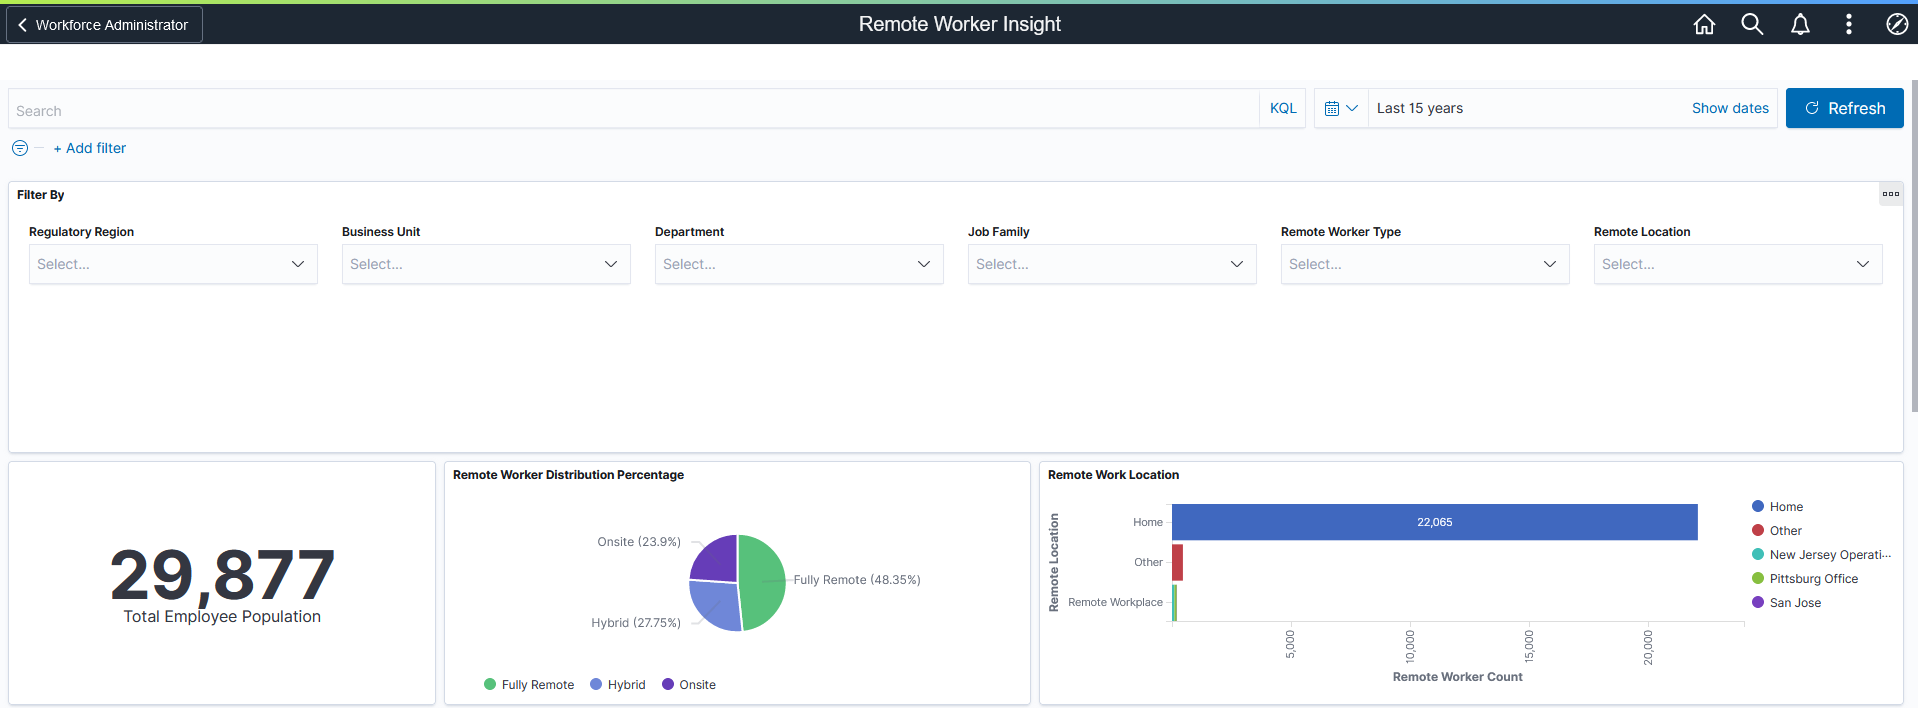 Remote Worker Insight dashboard (1 of 4) for the administrator